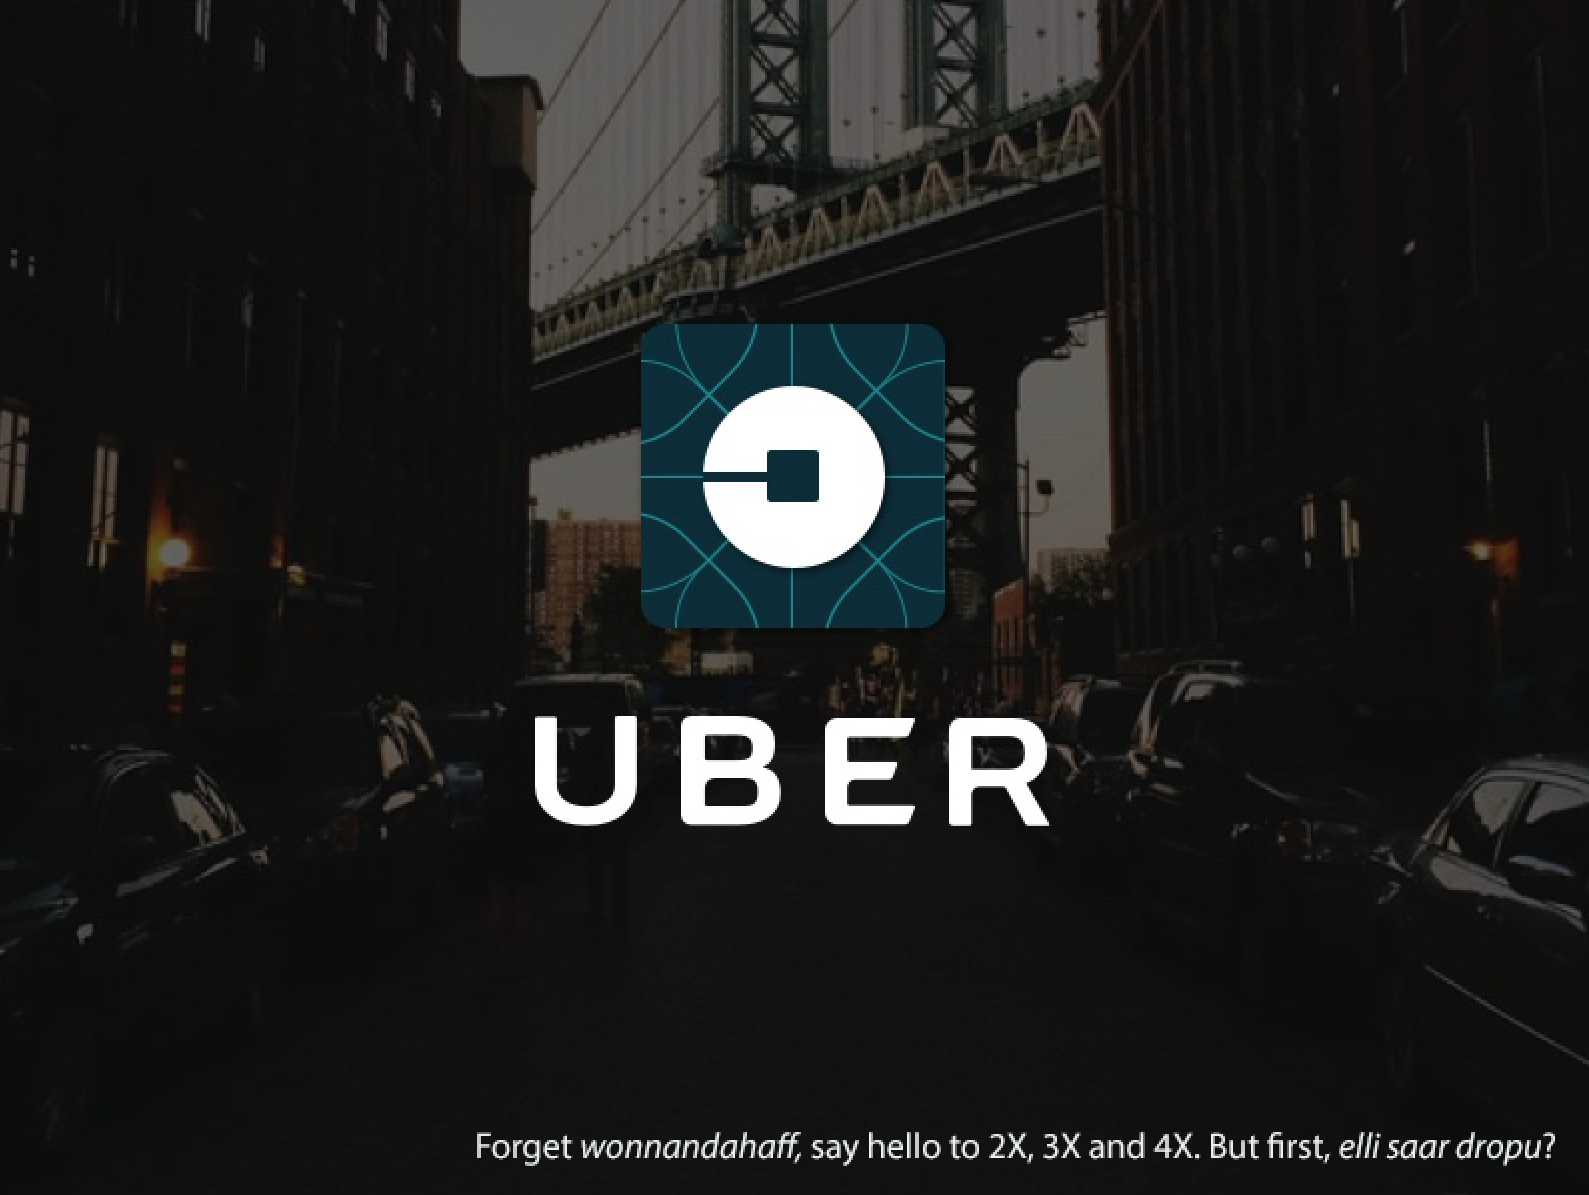 Uber – truly the killer service